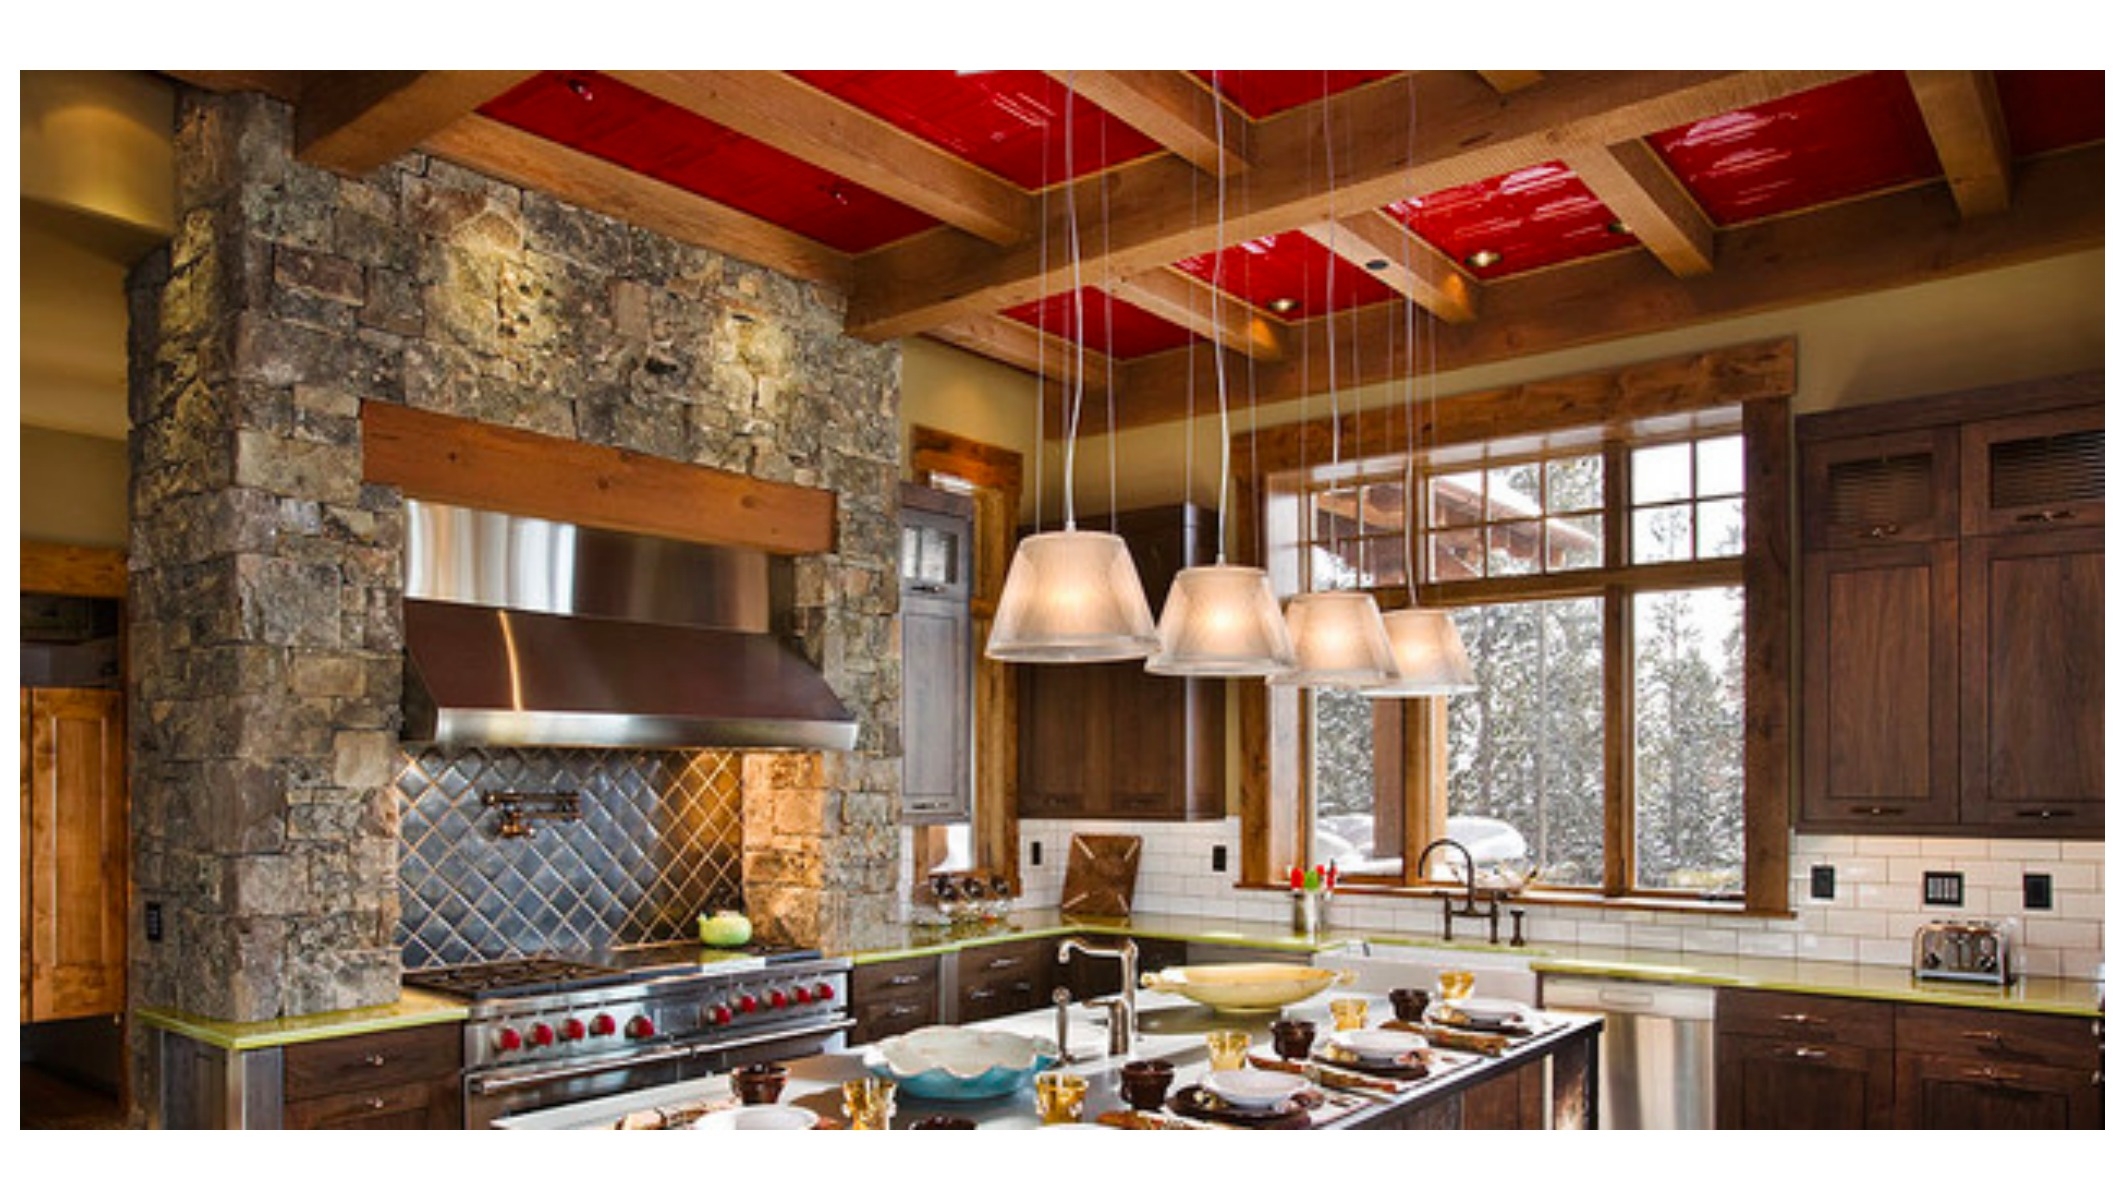 Permalink to Ceiling Tile Ideas For Kitchen